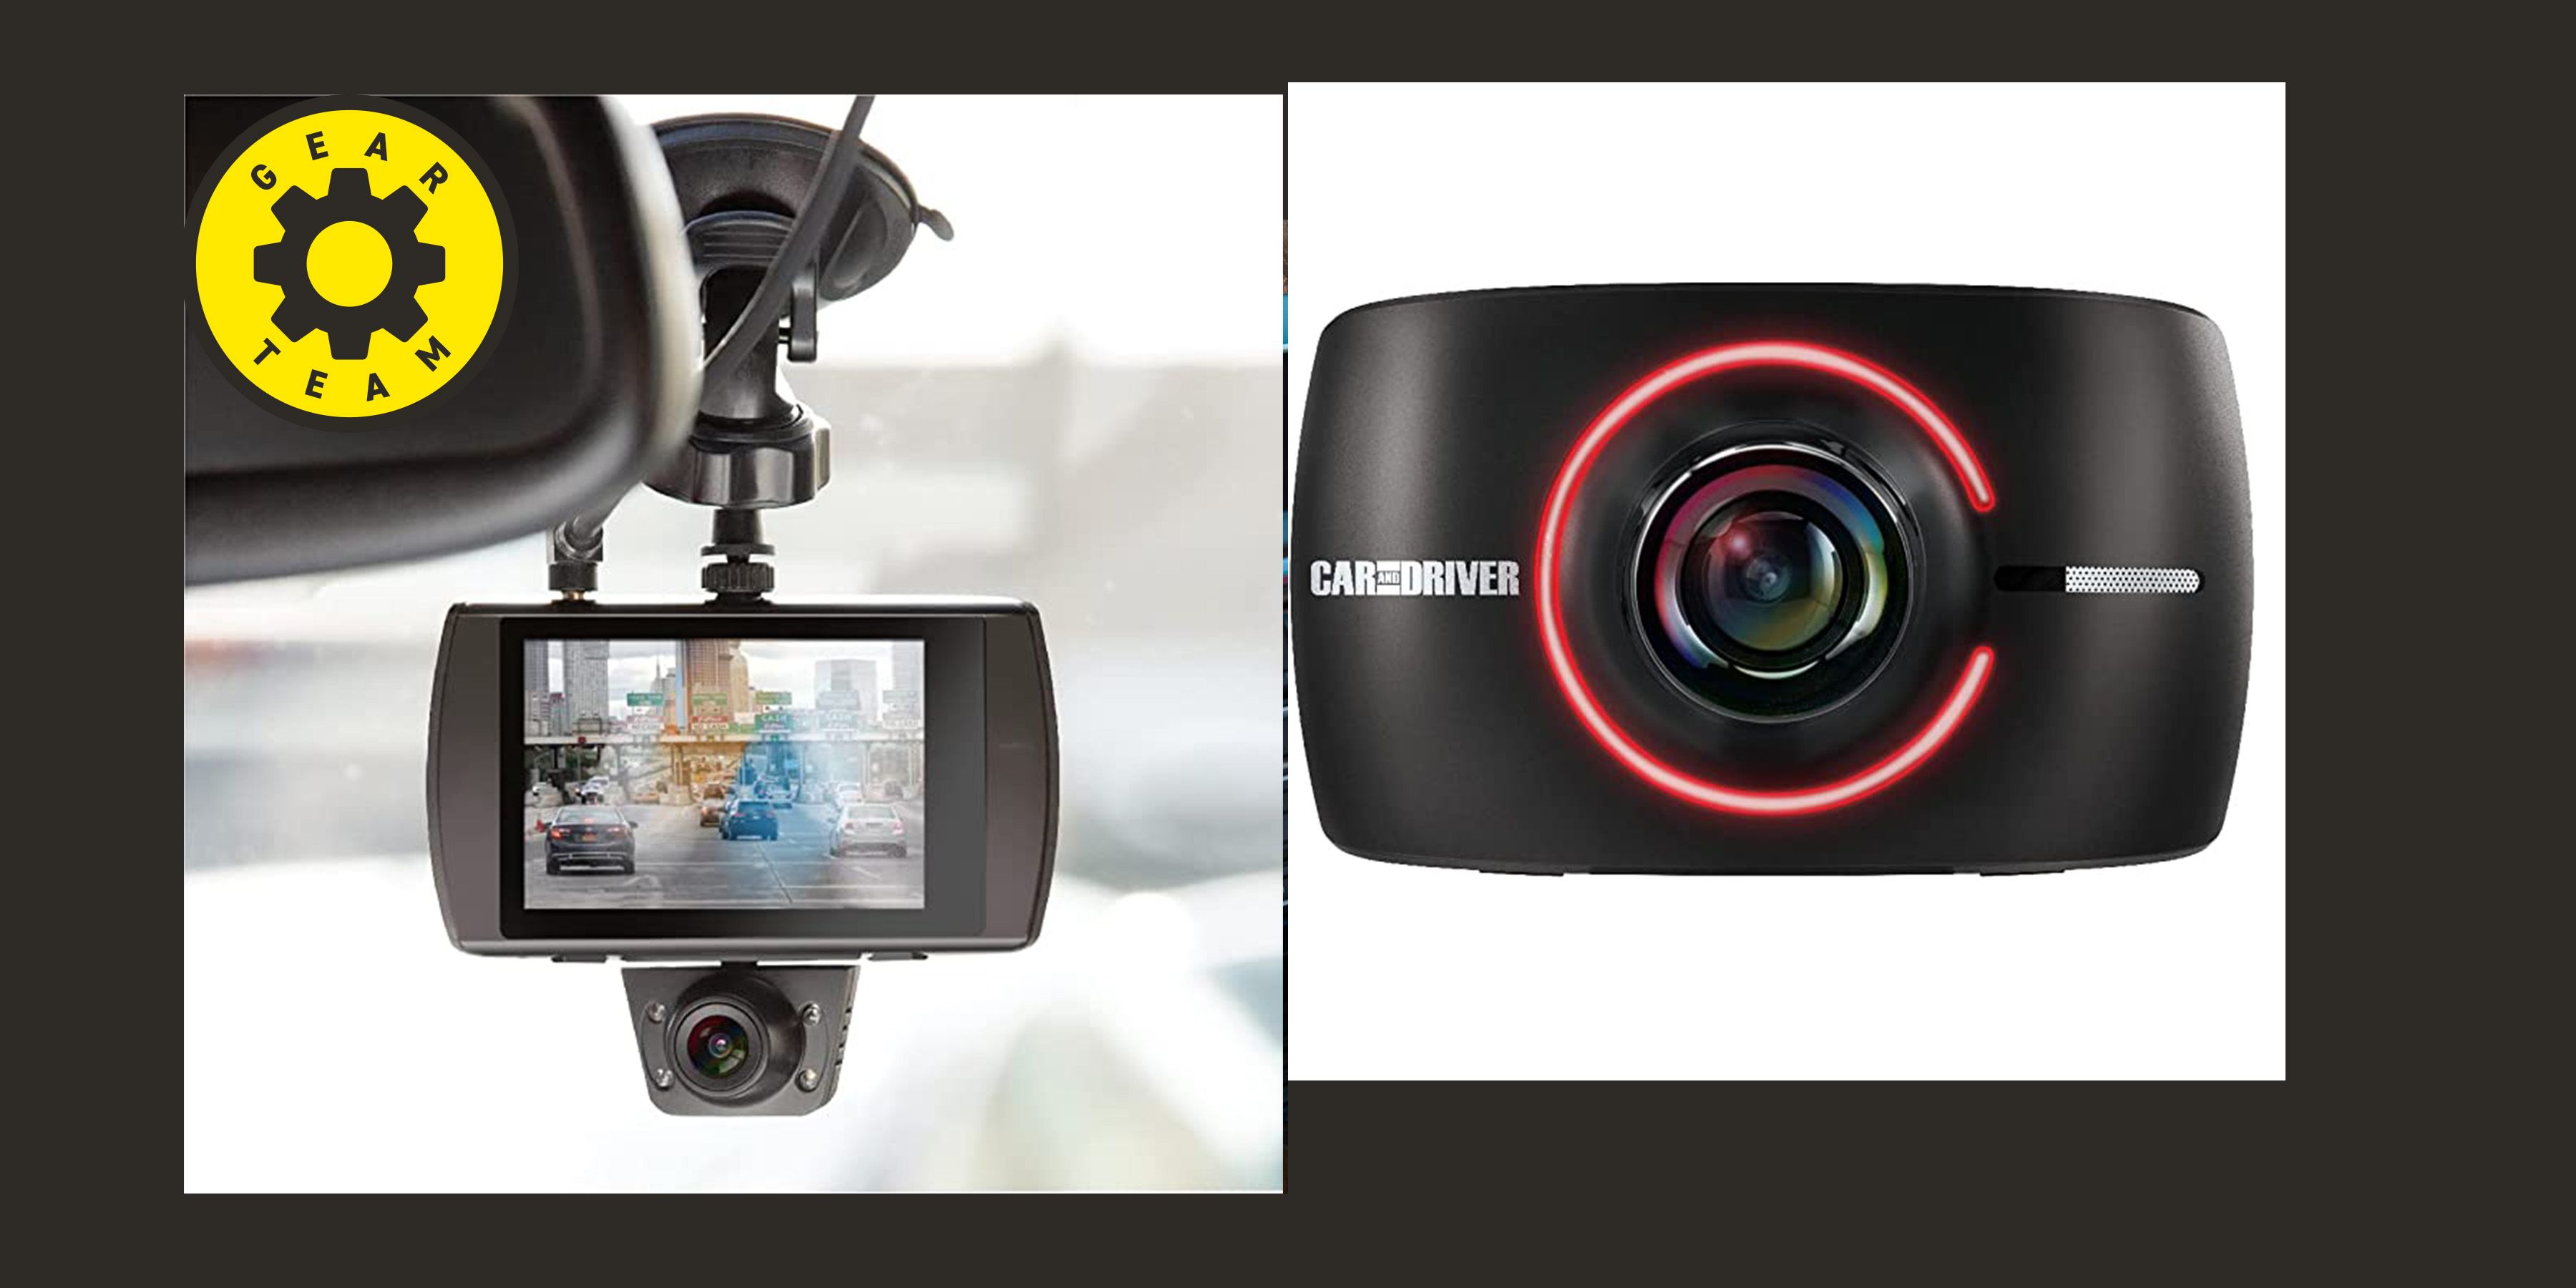 Deal Alert: Save $100 on this Top-of-the-Line Dashcam